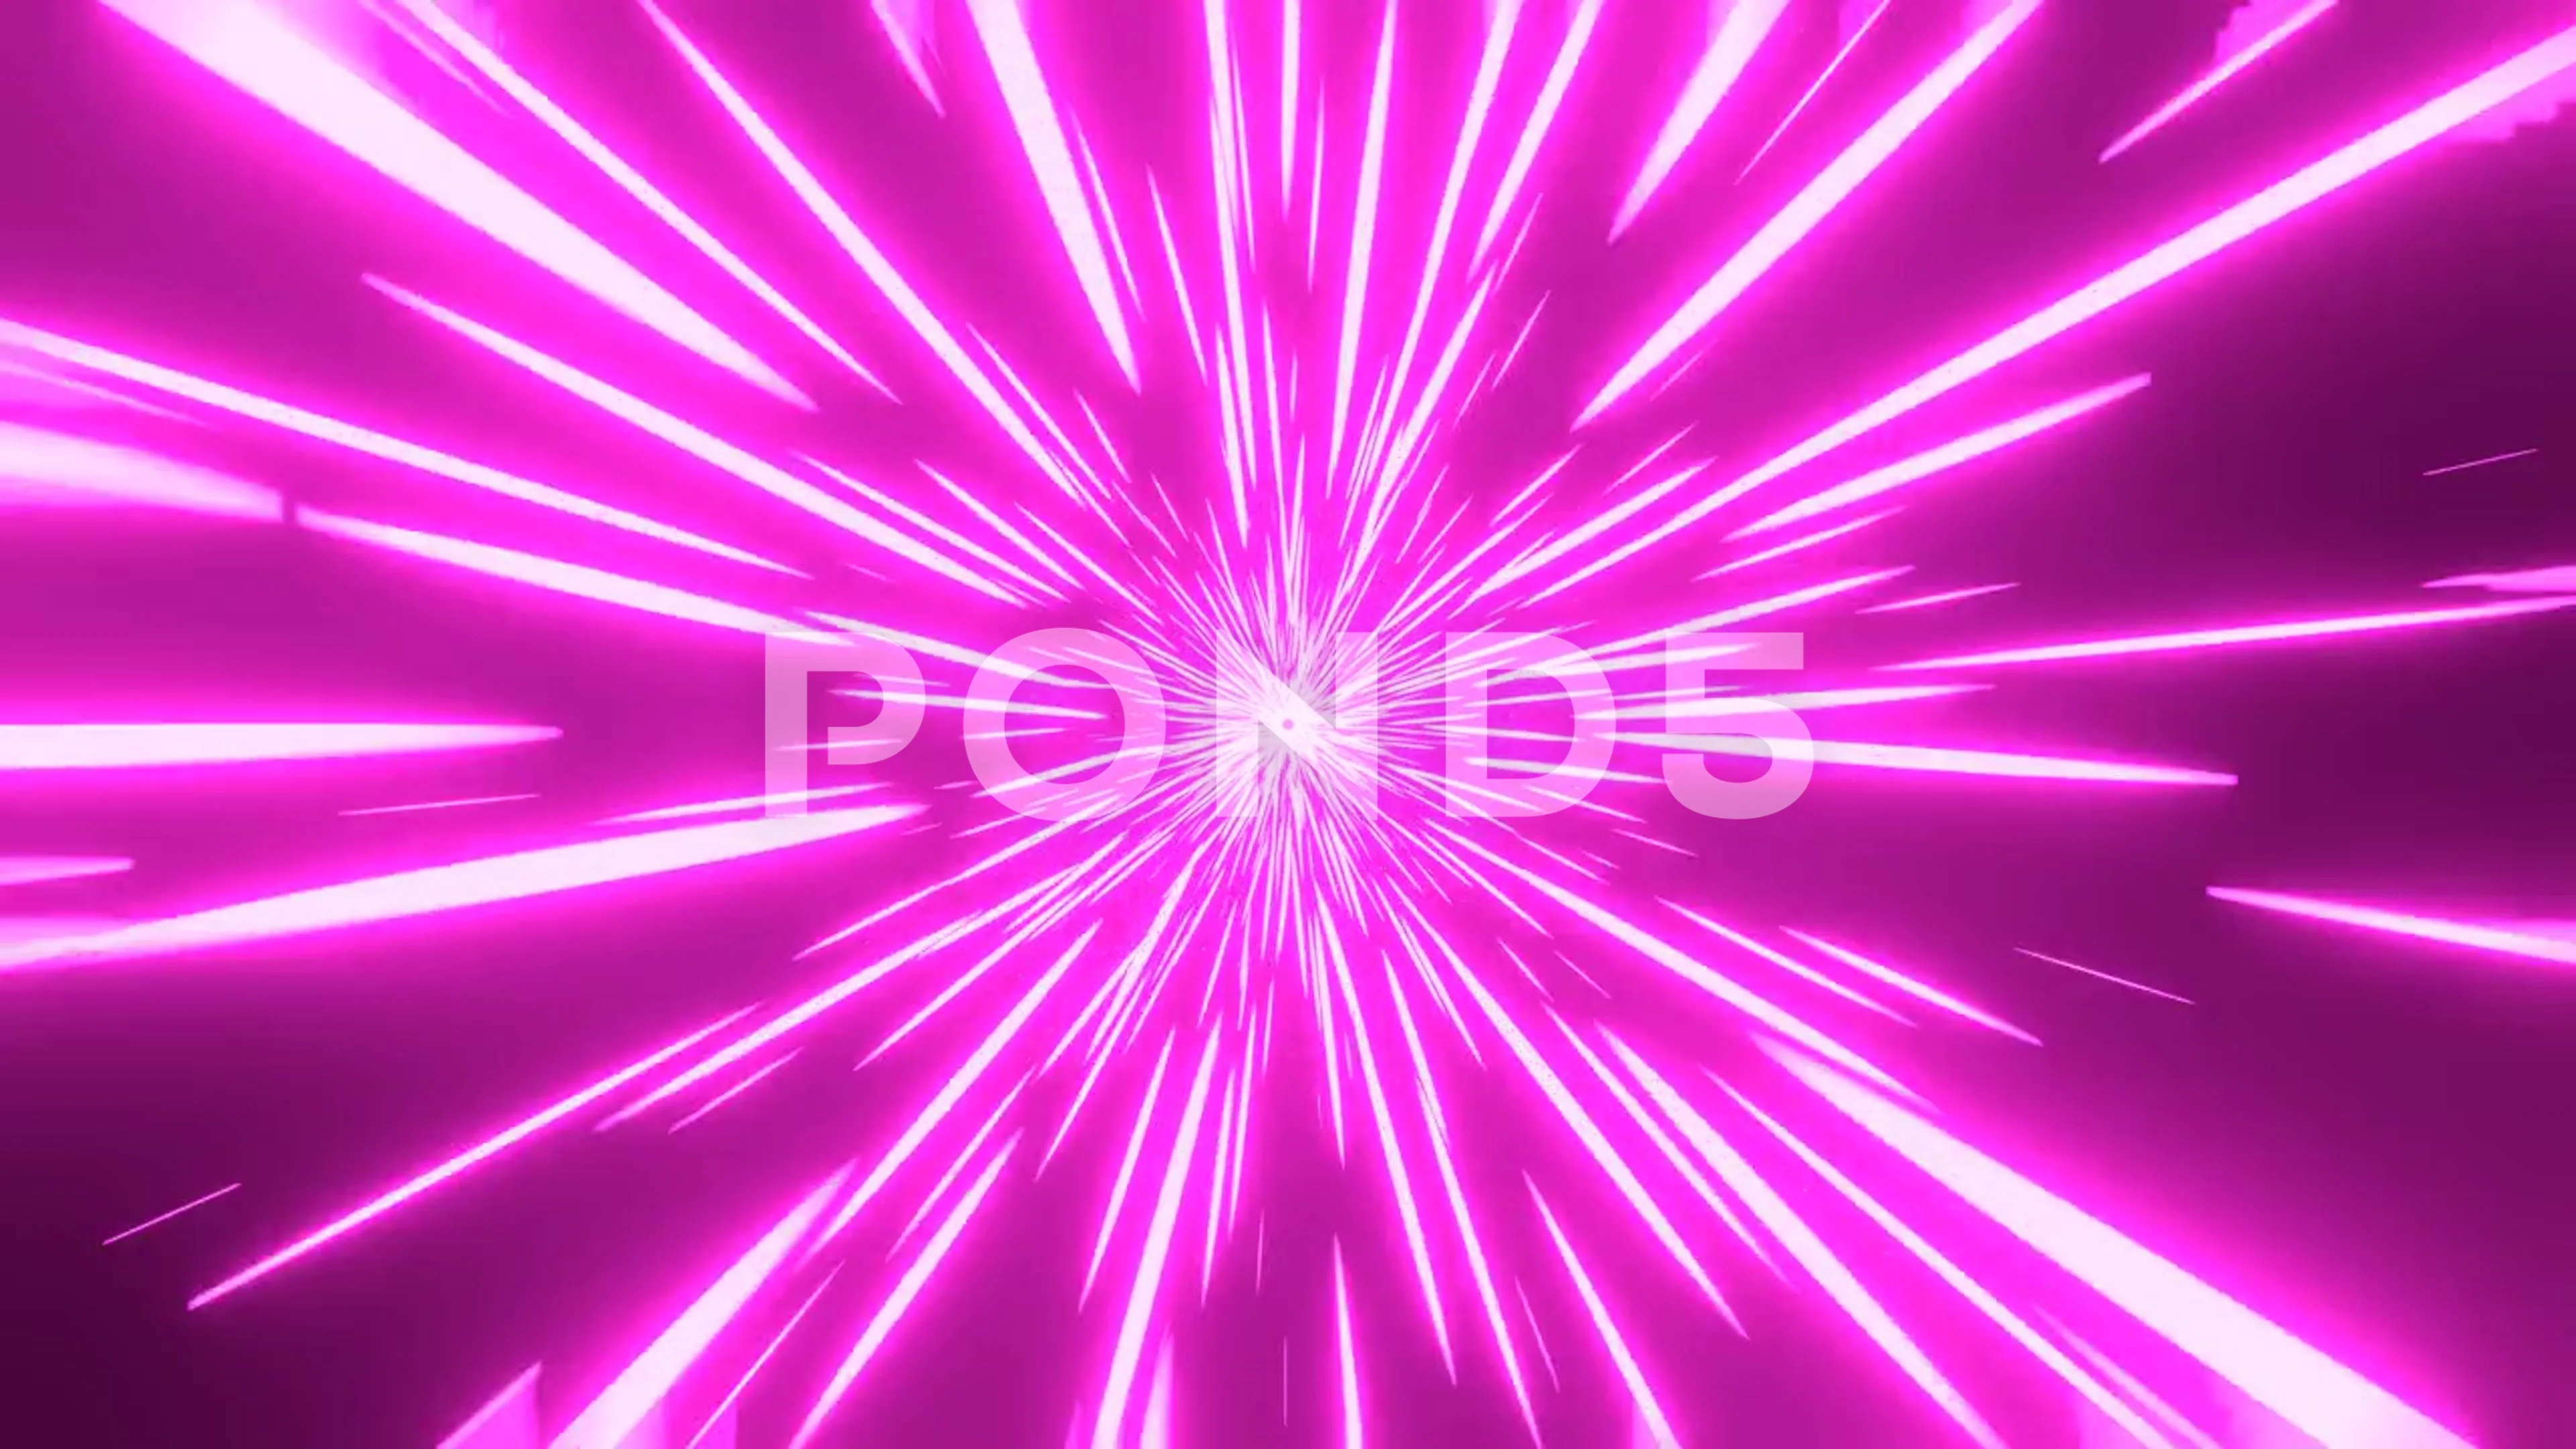 Anime motion speed lines background design element